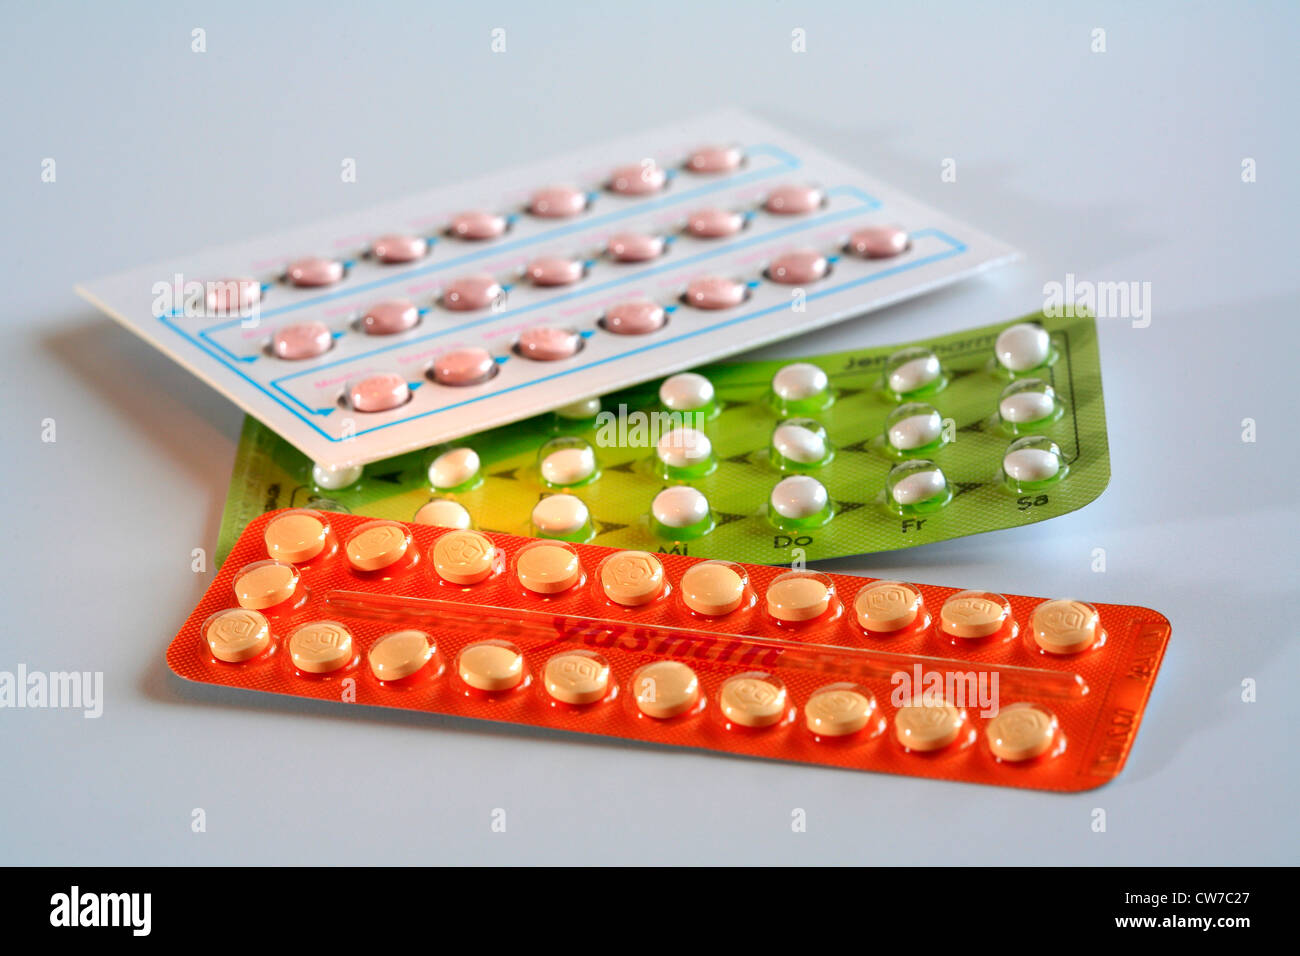 blister packs of birth-control pills Stock Photo